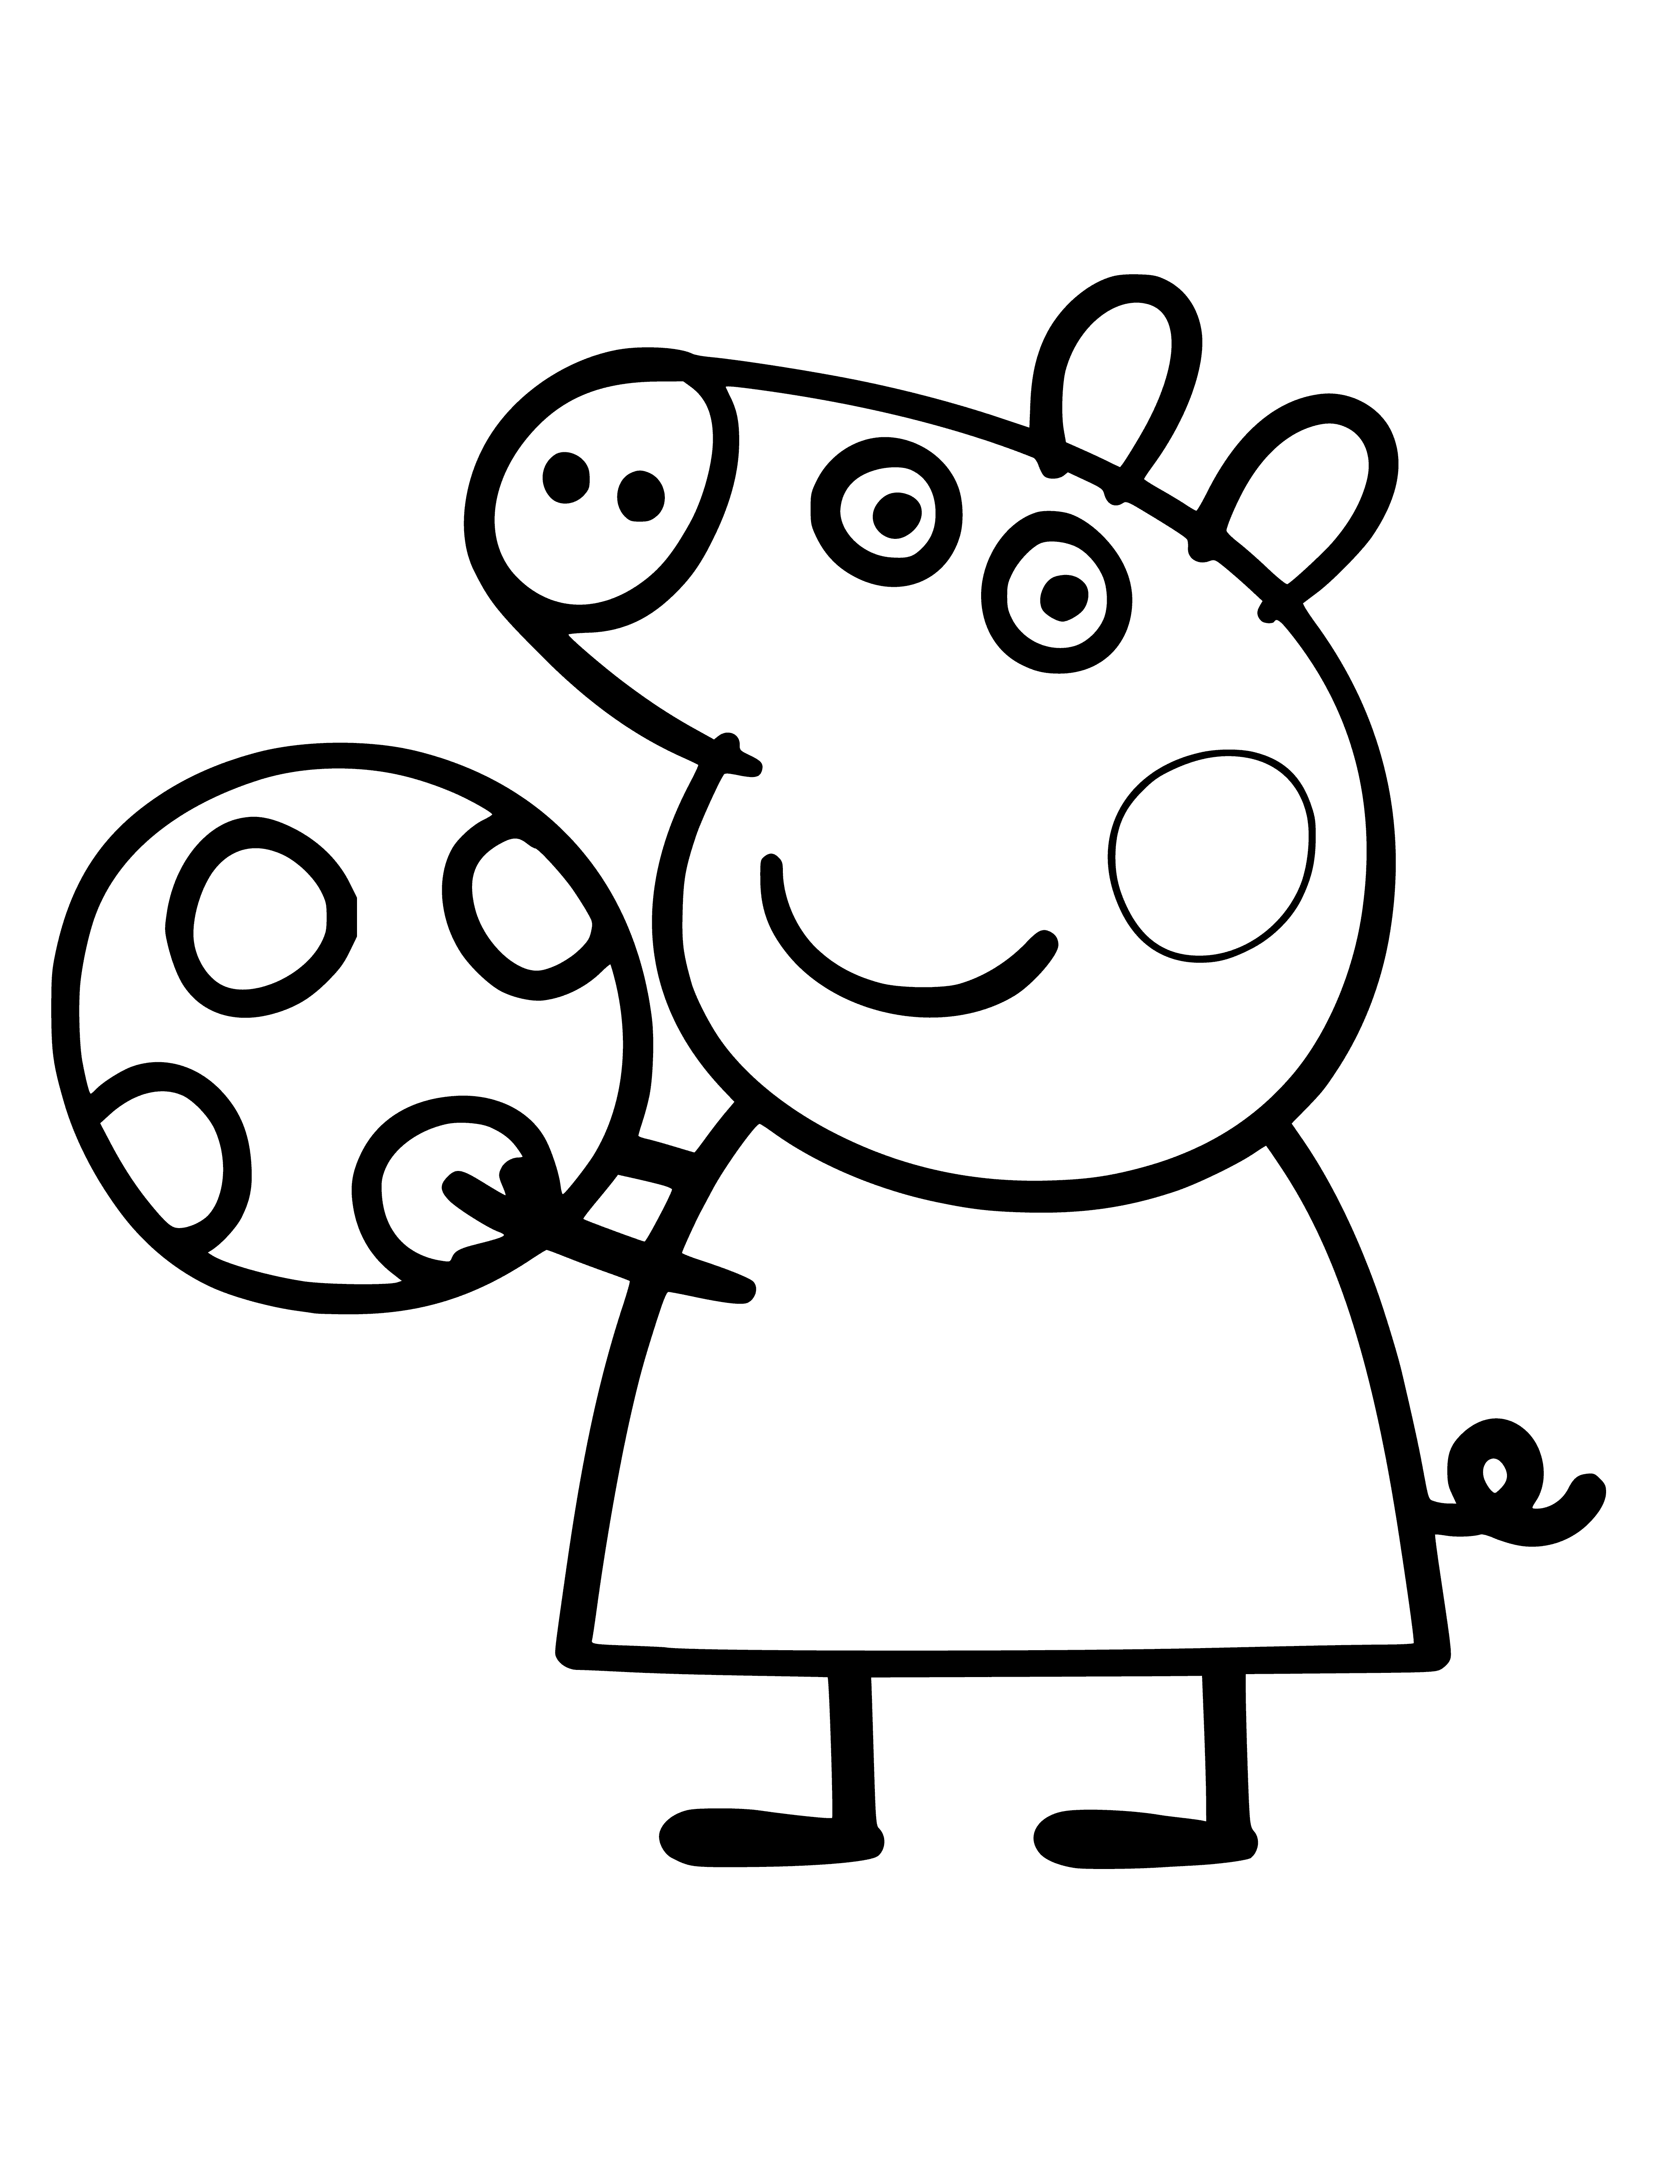 Peppa Pig with a ball coloring page